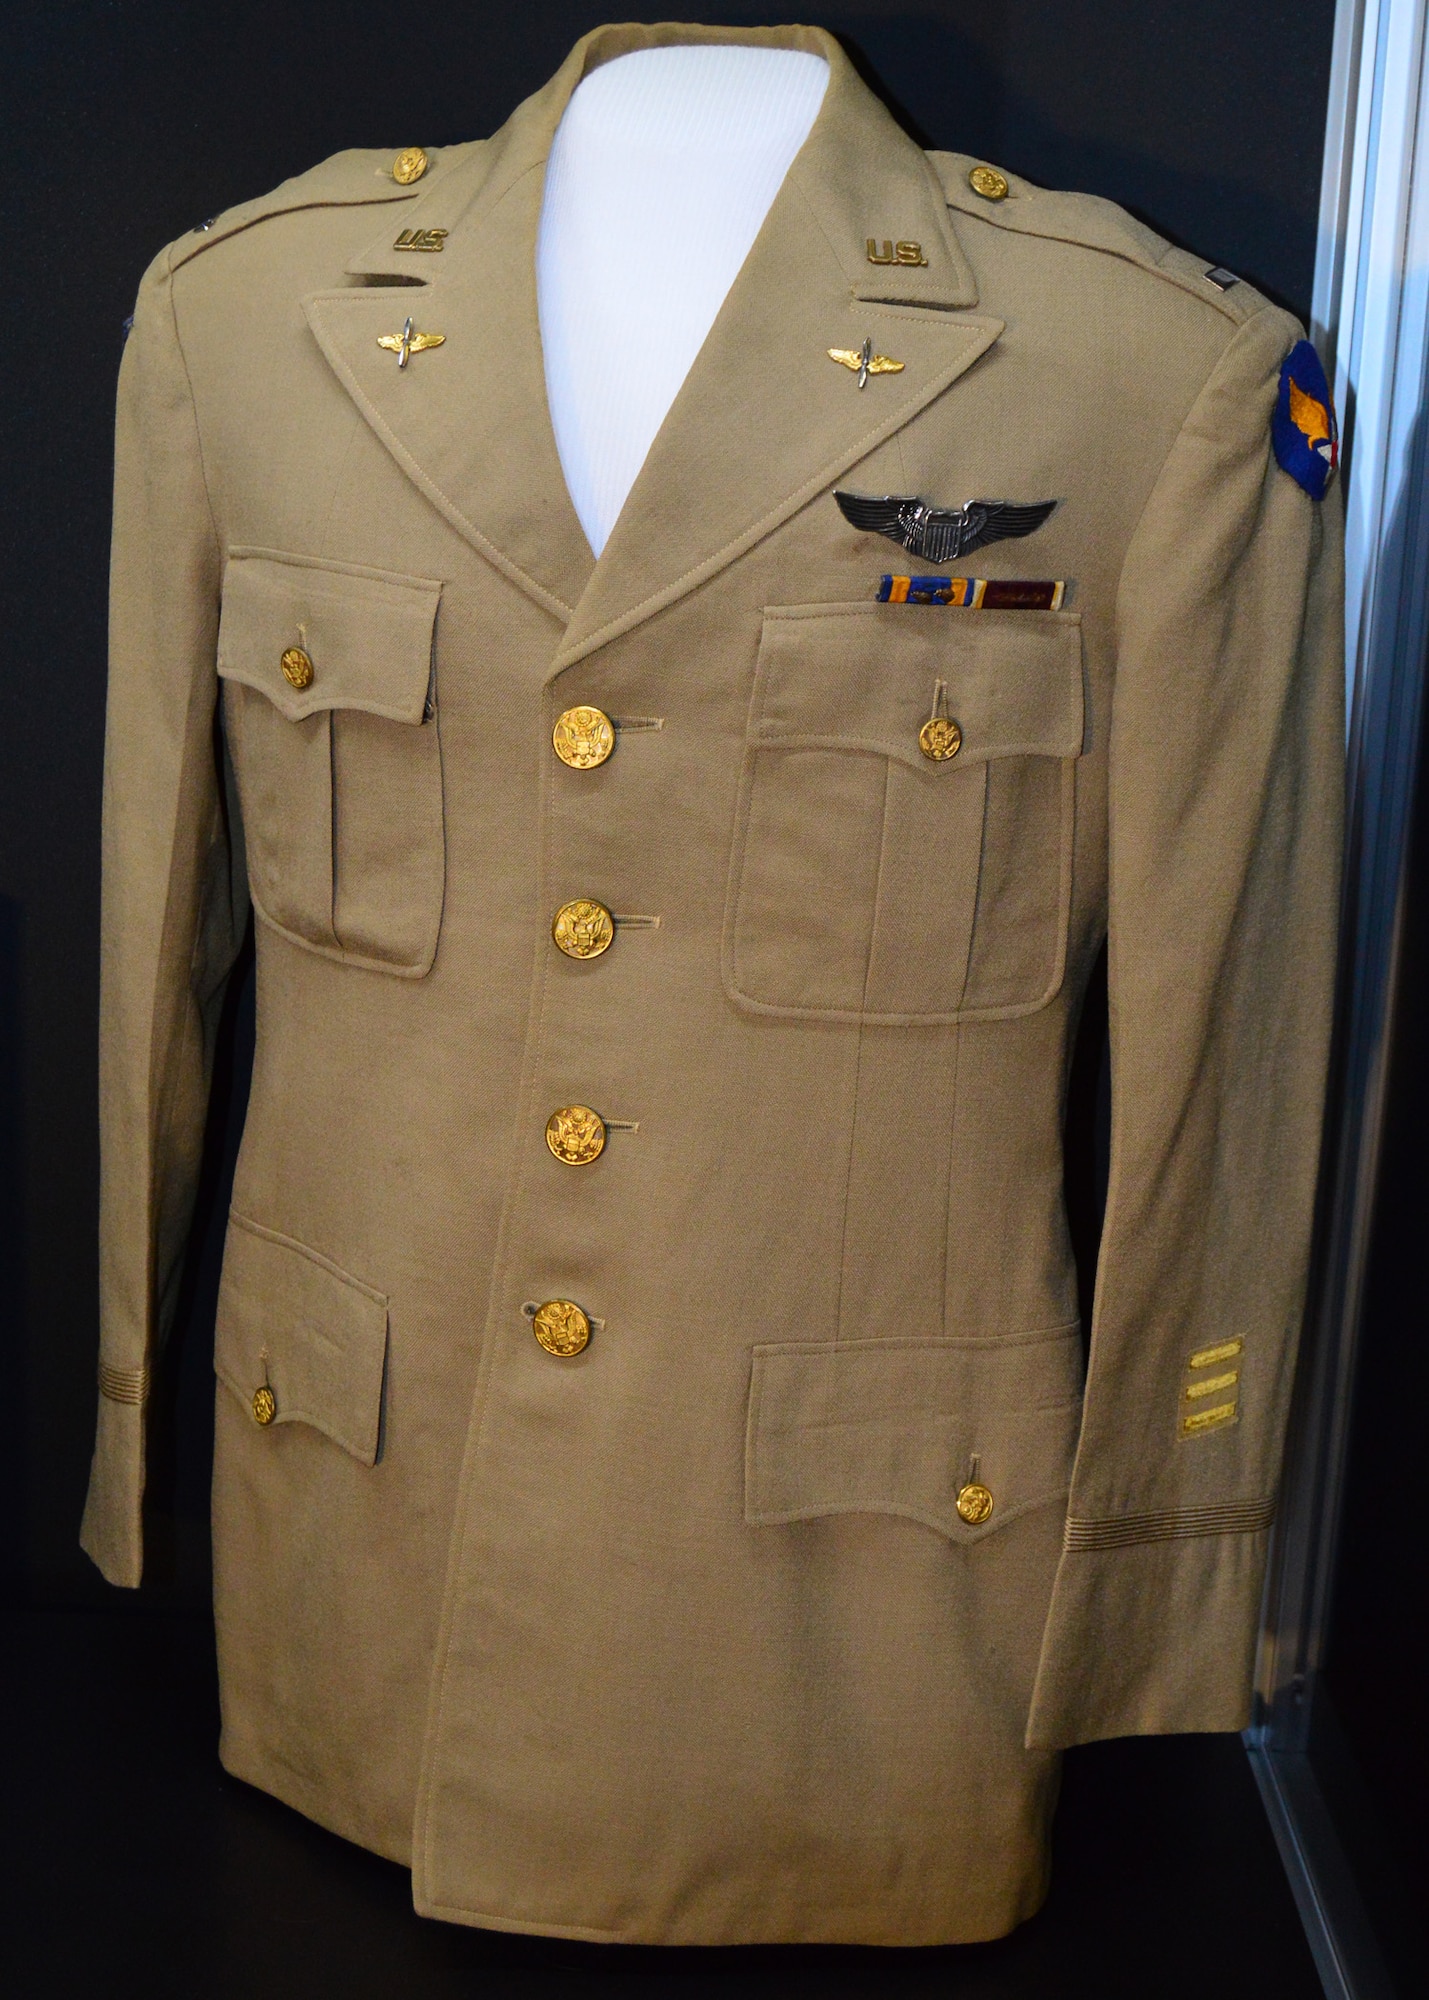 DAYTON, Ohio -- Service coat with the Twelfth Air Force emblem, pilot wings, medal ribbons, and three service stripes belonging to 1st Lt John L. Hamilton.  A pilot with the 99th Fighter Squadron, he received the Purple Heart after being wounded in the leg by flak during a dive-bombing mission at Anzio on March 9, 1944.  [Please note that the “U.S.” lapel and rank insignia have been added to complete the uniform.] This service coat is on display in the Tuskegee Airmen Exhibit in the WWII Gallery at the National Museum of the U.S. Air Force. (U.S. Air Force photo)